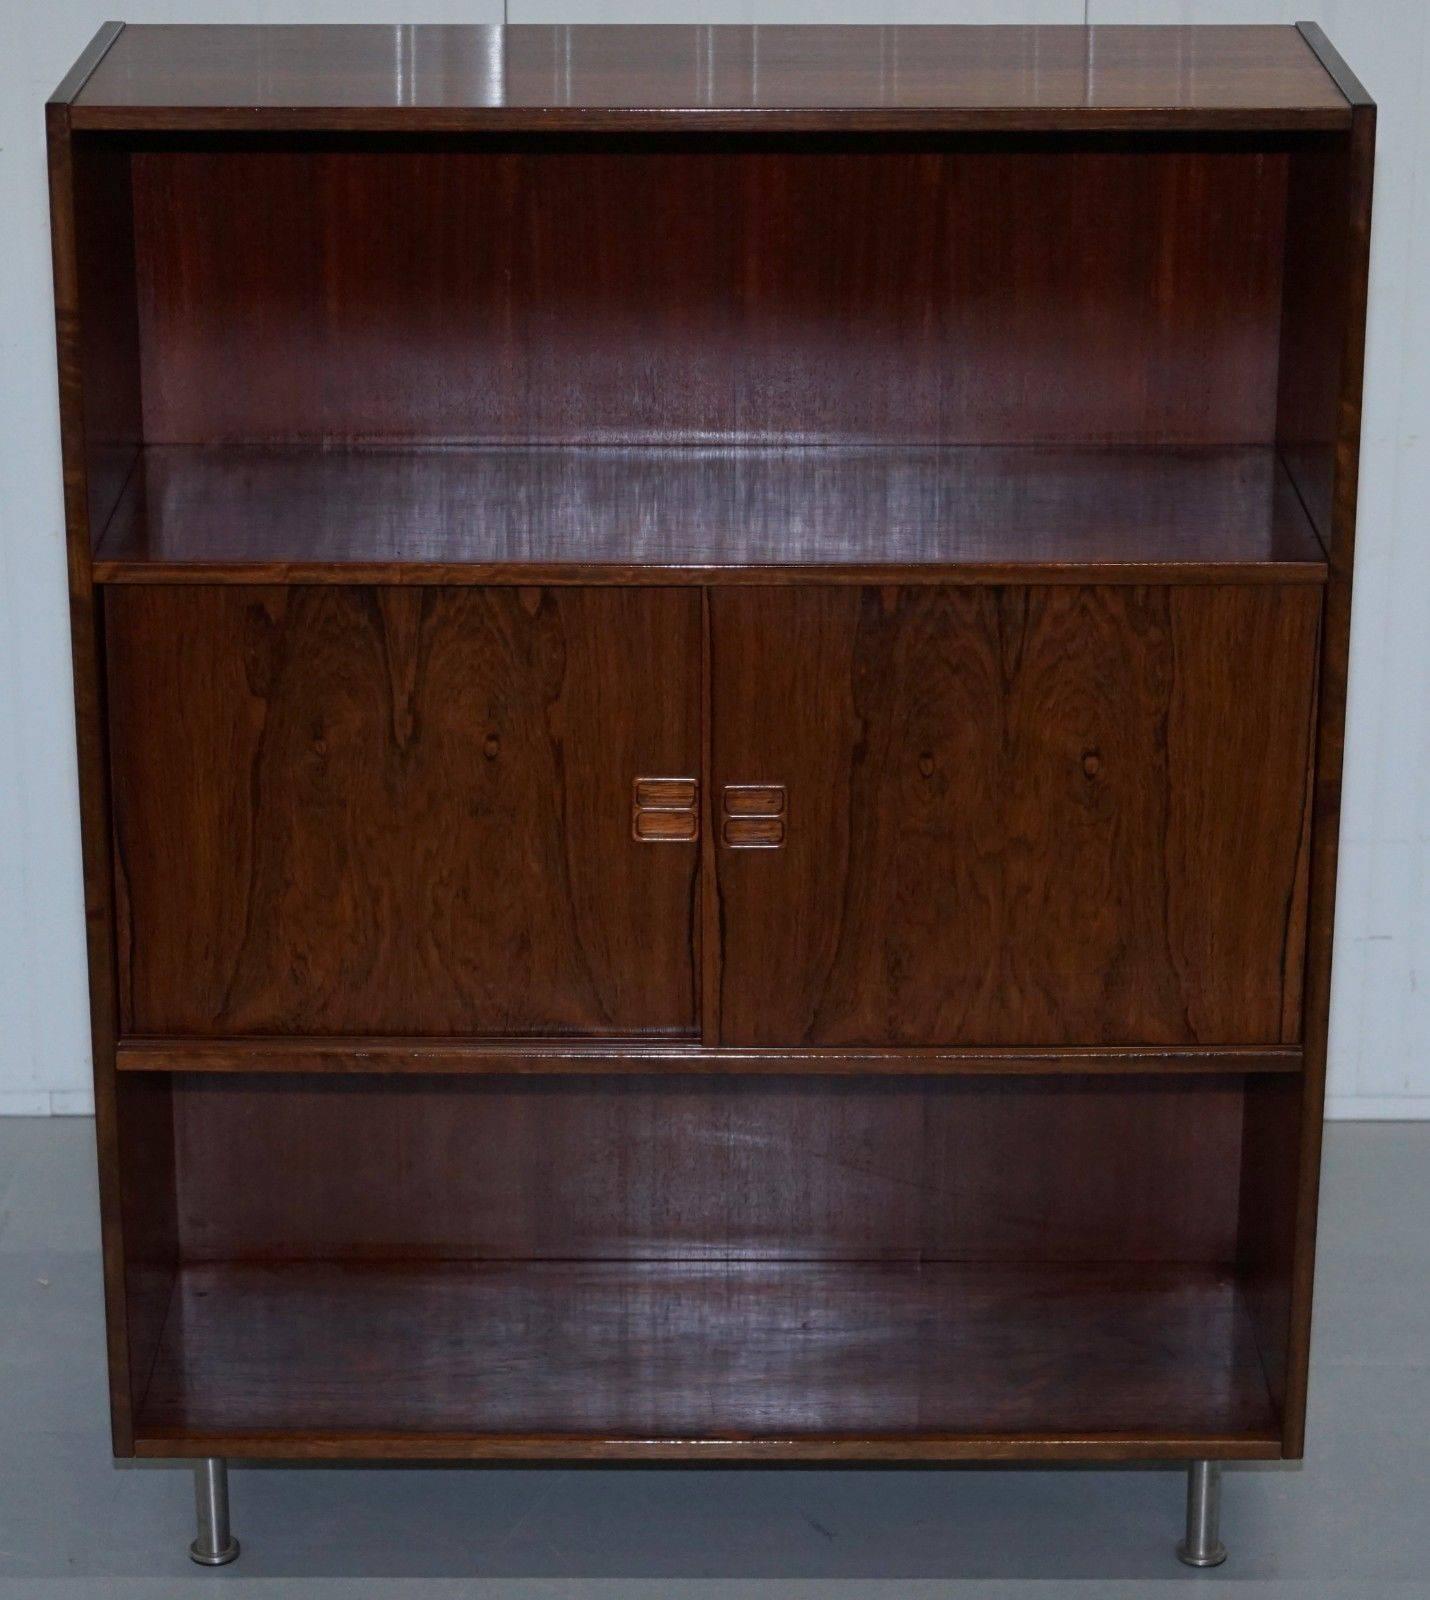 We are delighted to offer for sale this lovely Omann Jun Møbelfabrik Brazilian wood open bookcase or cabinet

This is part of a suite, I have a pair of taller bookcases listed under my other items, the same designer, they make a lovely suite 

A